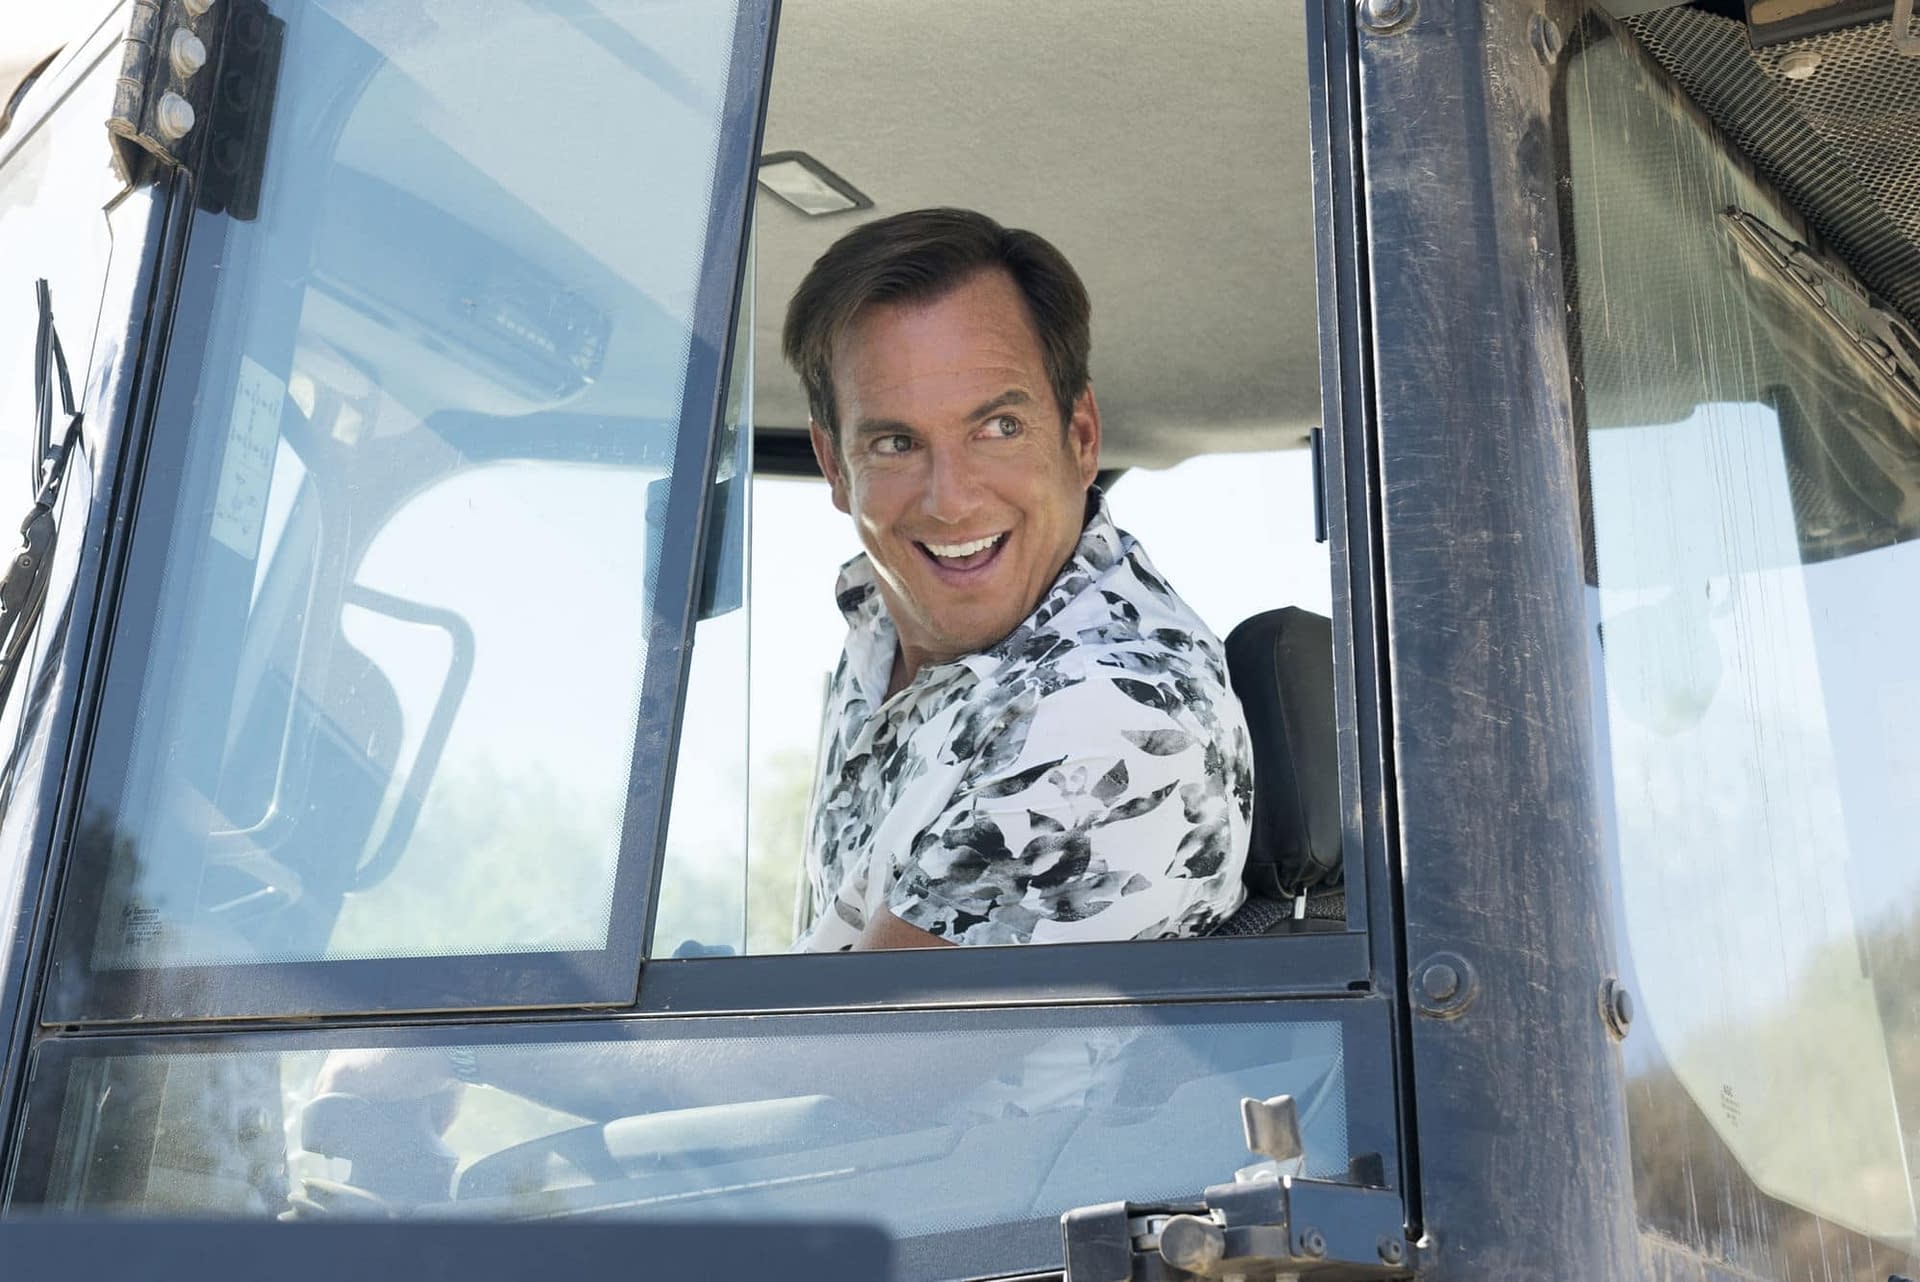 'Arrested Development' Season 5b: It's a Bluth Family "Whodunit?" [PREVIEW]